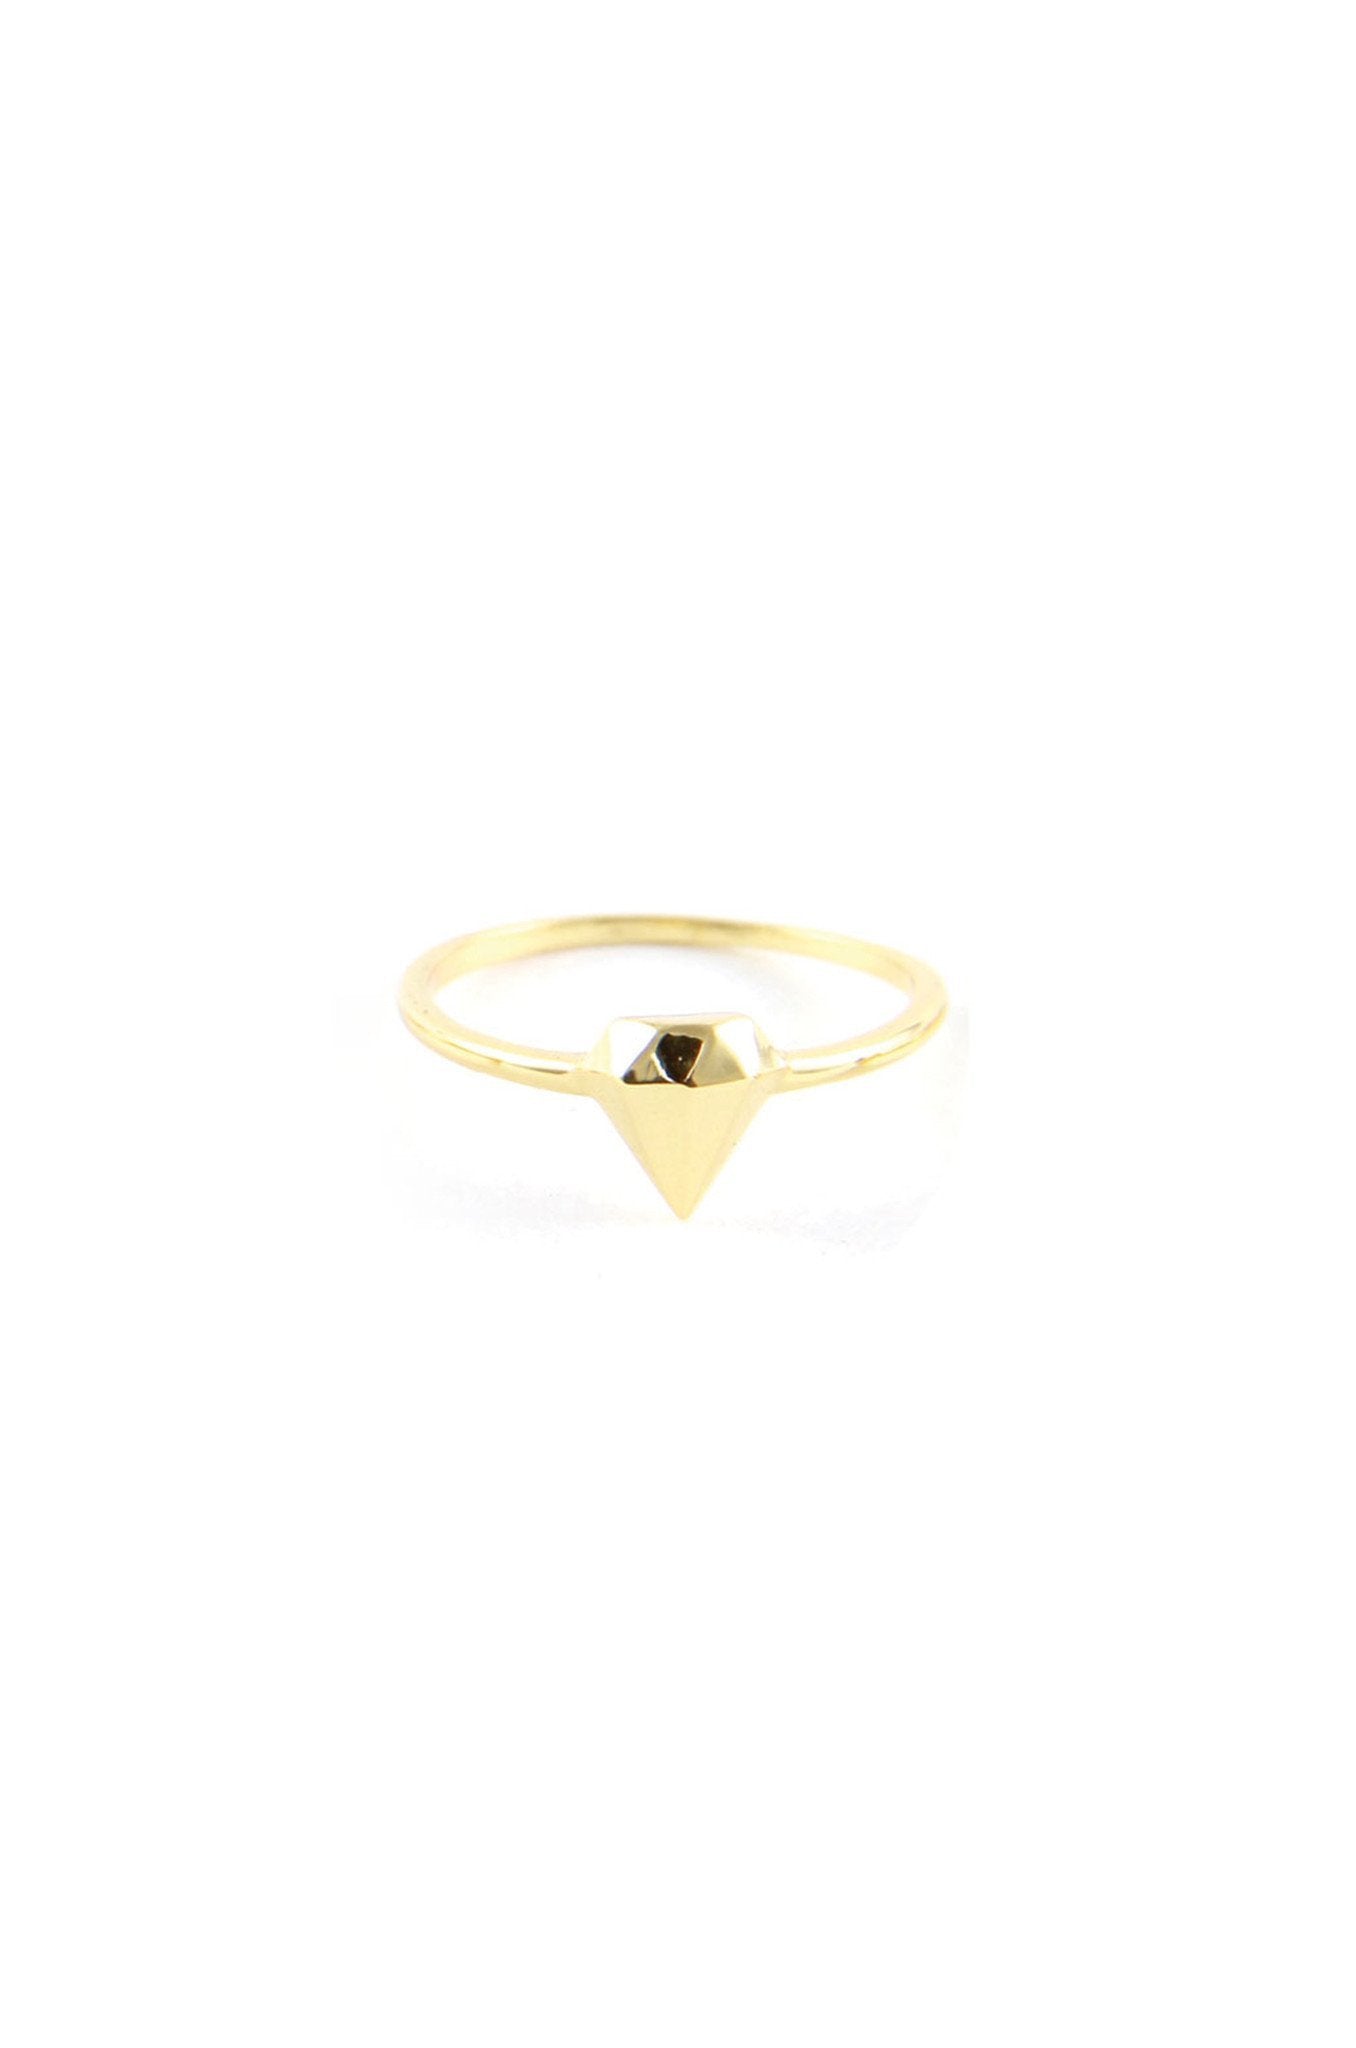 Lucky Charm Ring in Gold with Diamond Shape